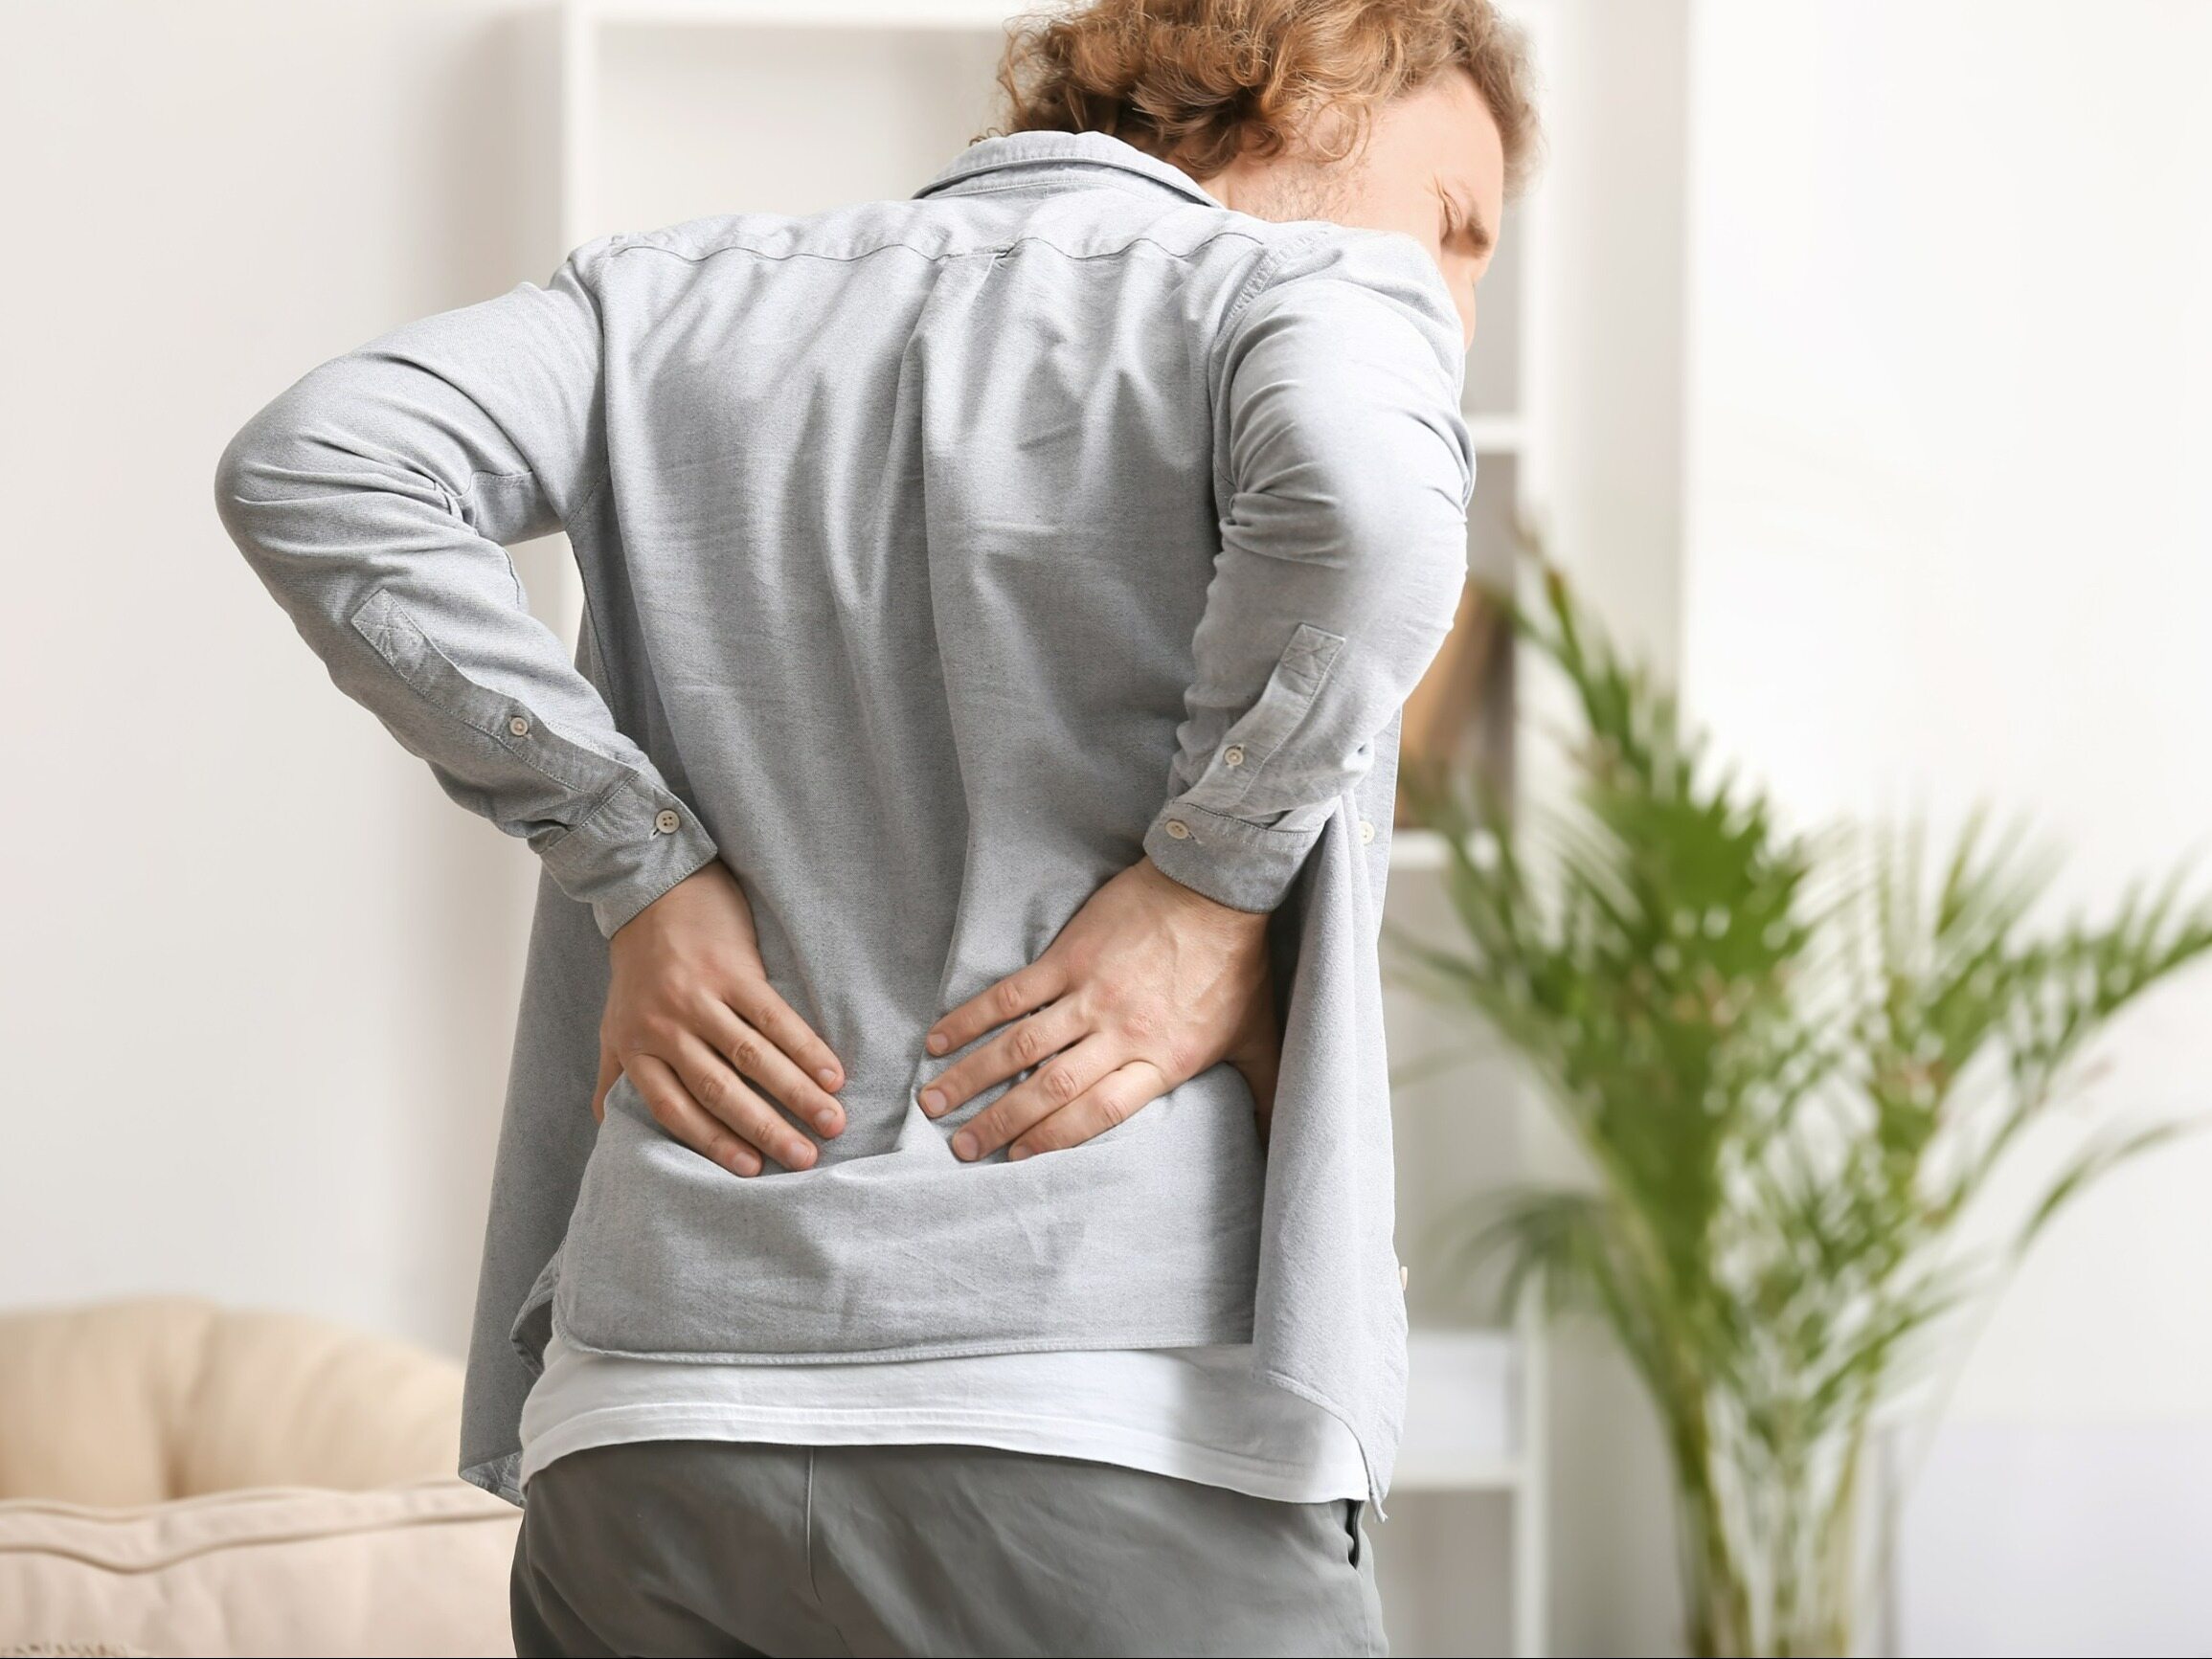 How to treat sciatica?  Learn the causes, symptoms and ways to prevent it